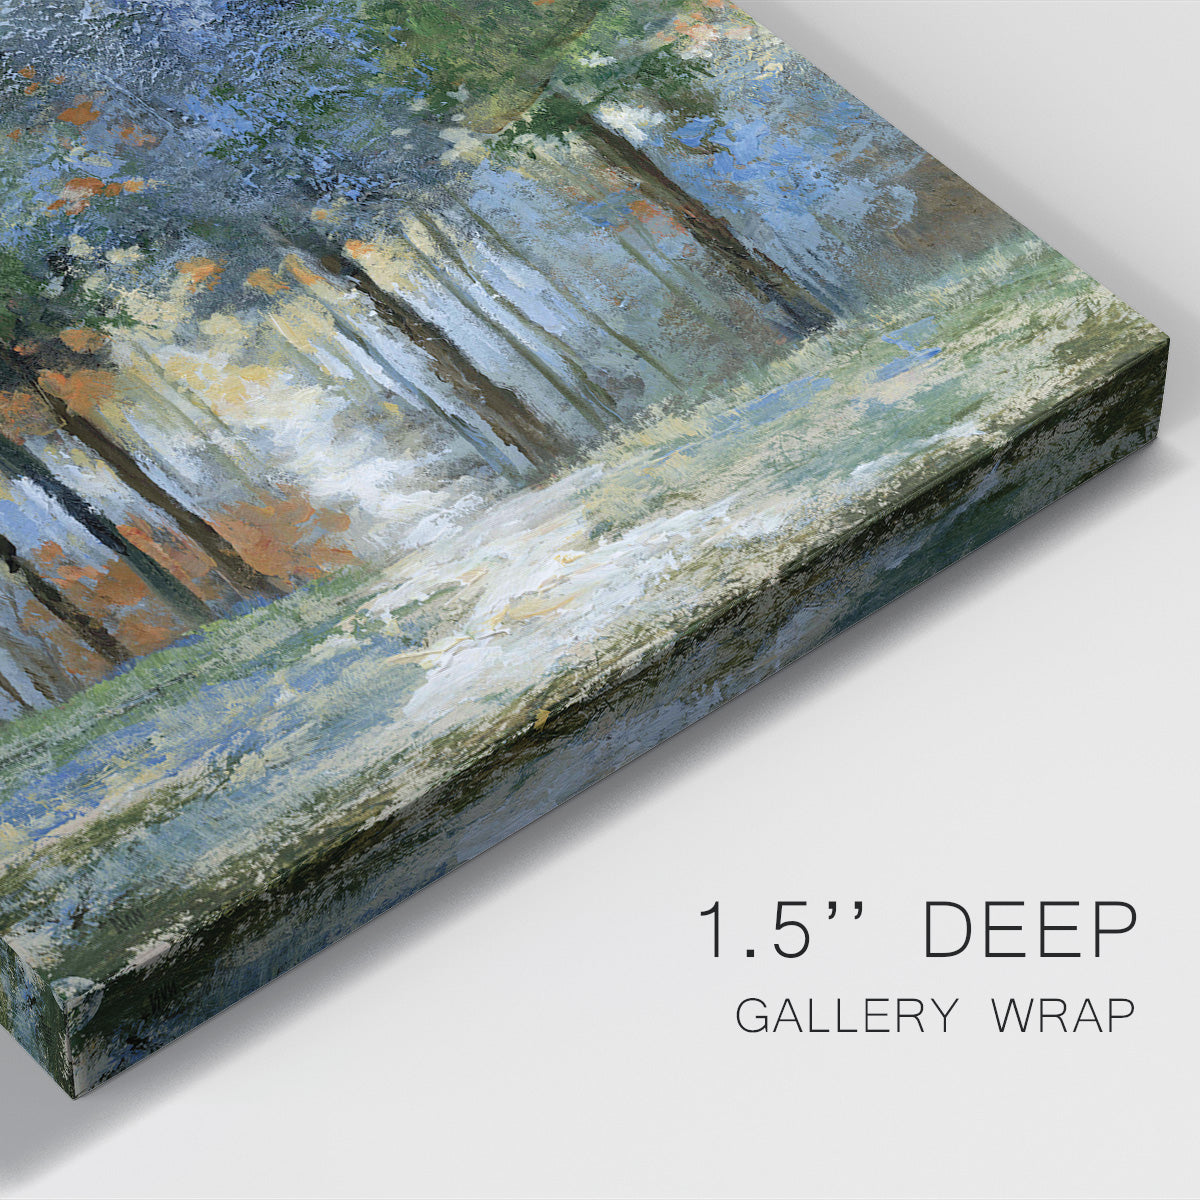 Afternoon Light Premium Gallery Wrapped Canvas - Ready to Hang